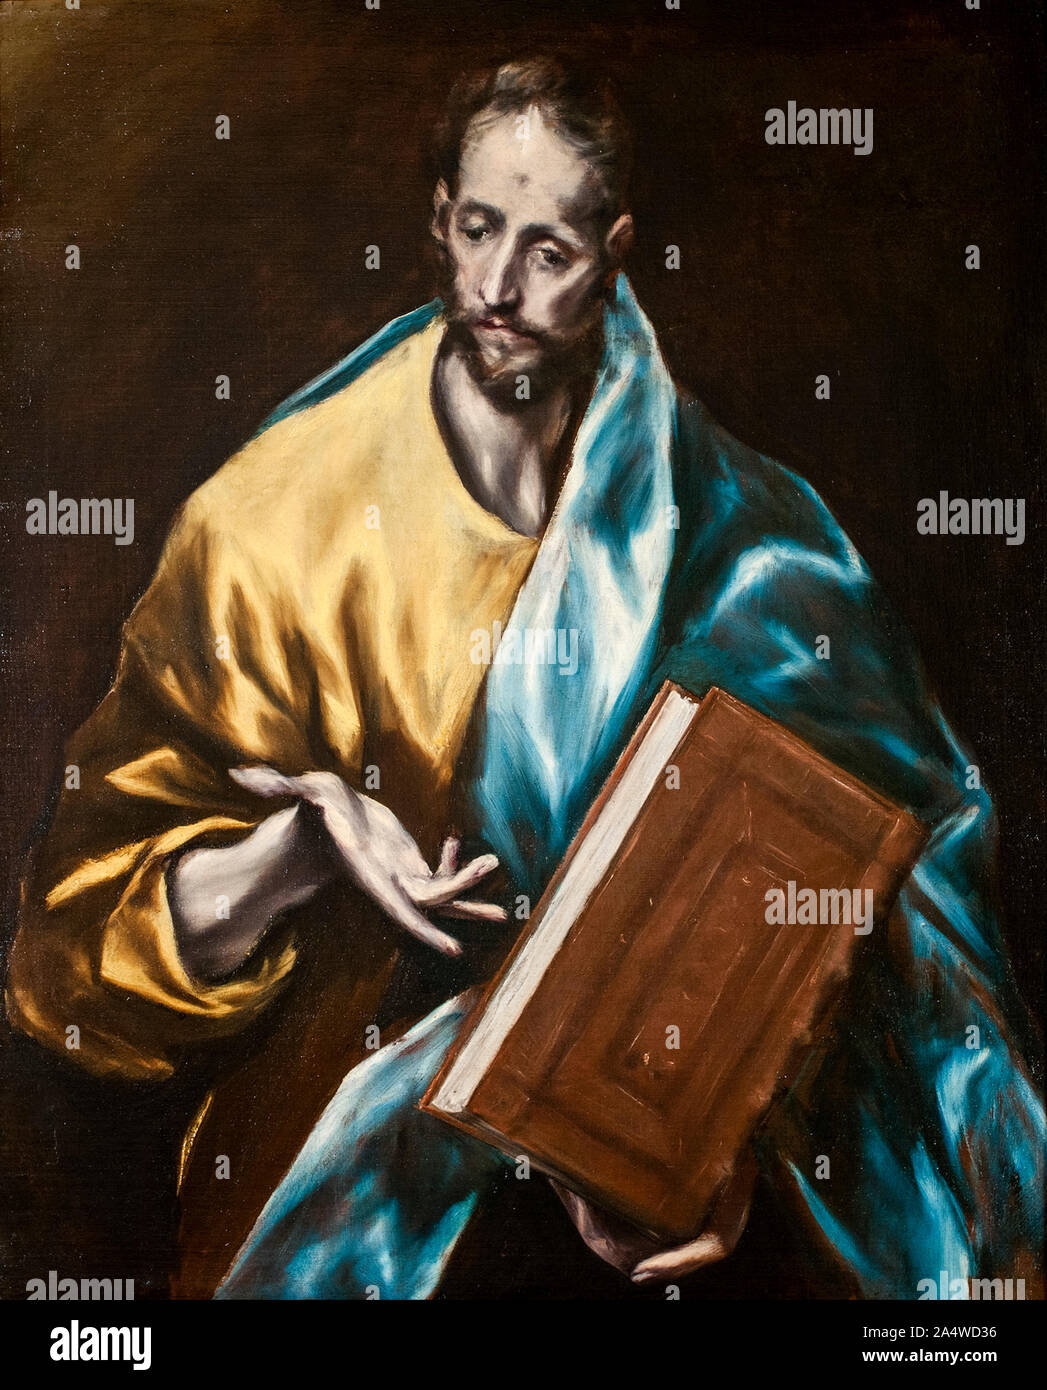 El Greco, Apostle St James the Less, painting, 1610-1614 Stock Photo